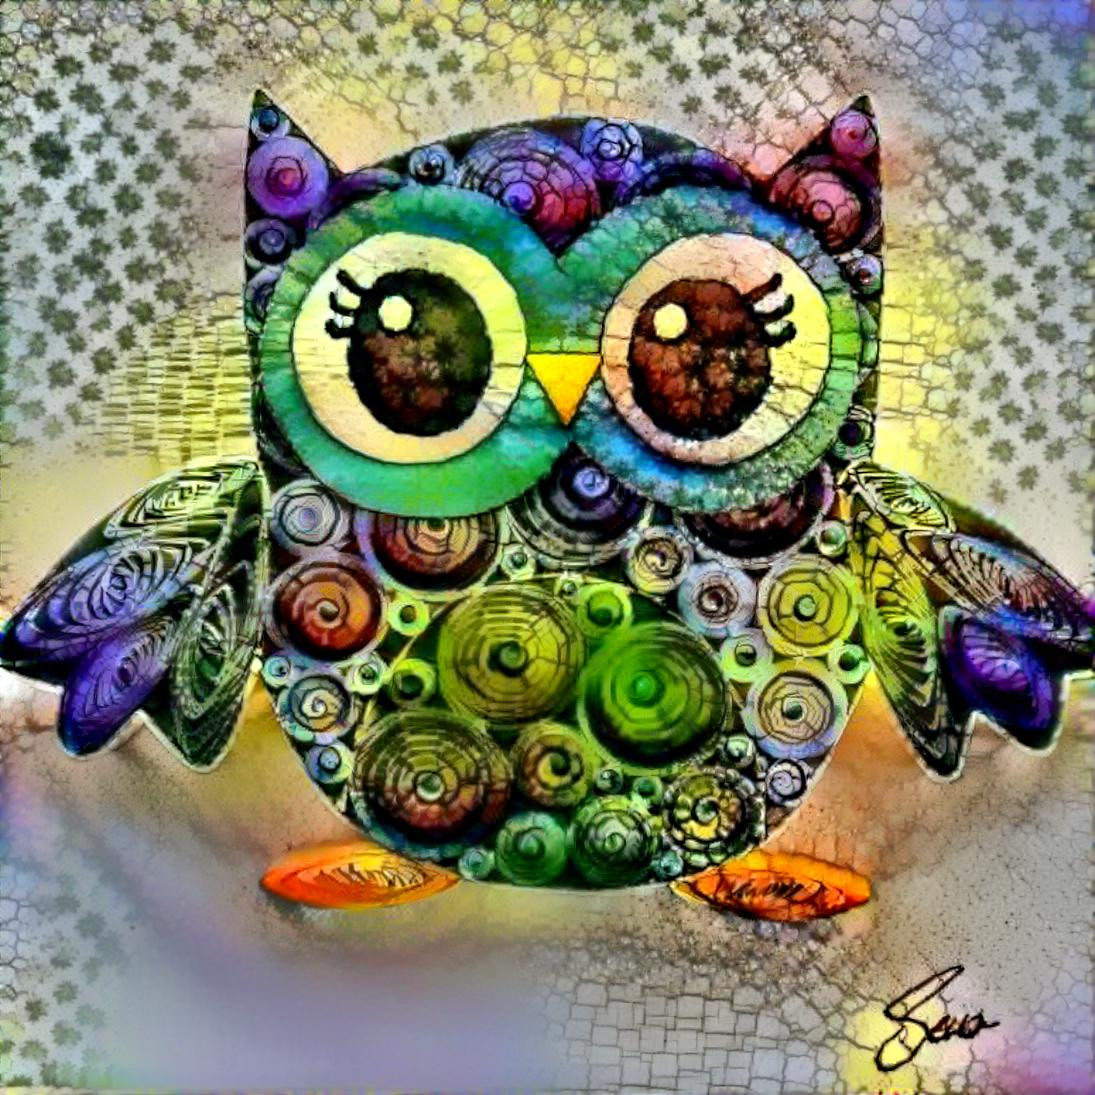 Owl two